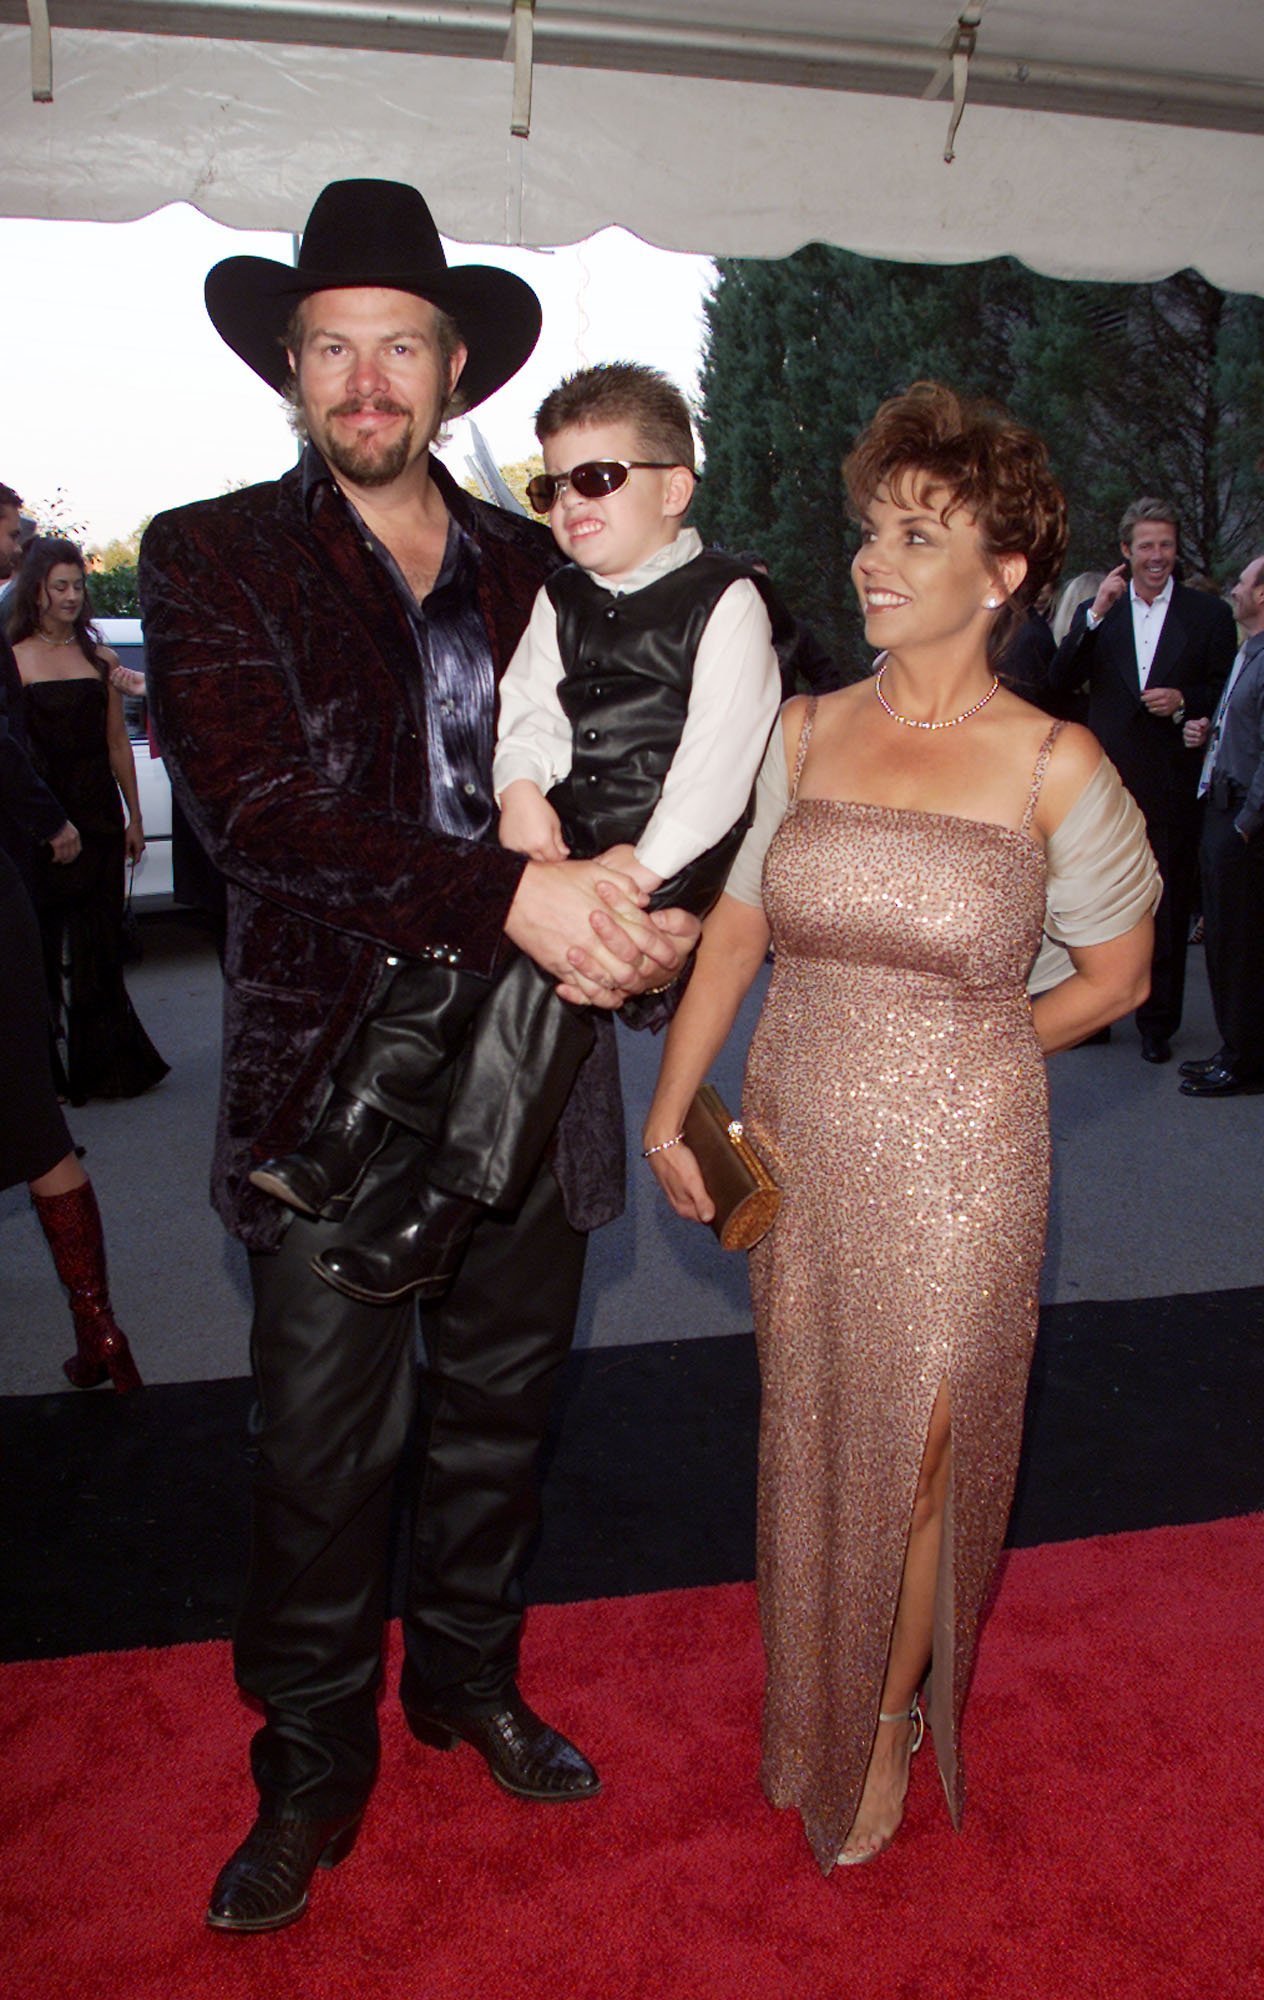 Singer Toby Keith with wife Tricia Lucus and their son Stelen arrive for the 34th Annual CMA Awards at the Grand Old Opry on October 24, 2000 in Nashville, Tennessee ┃ Source: Getty Images